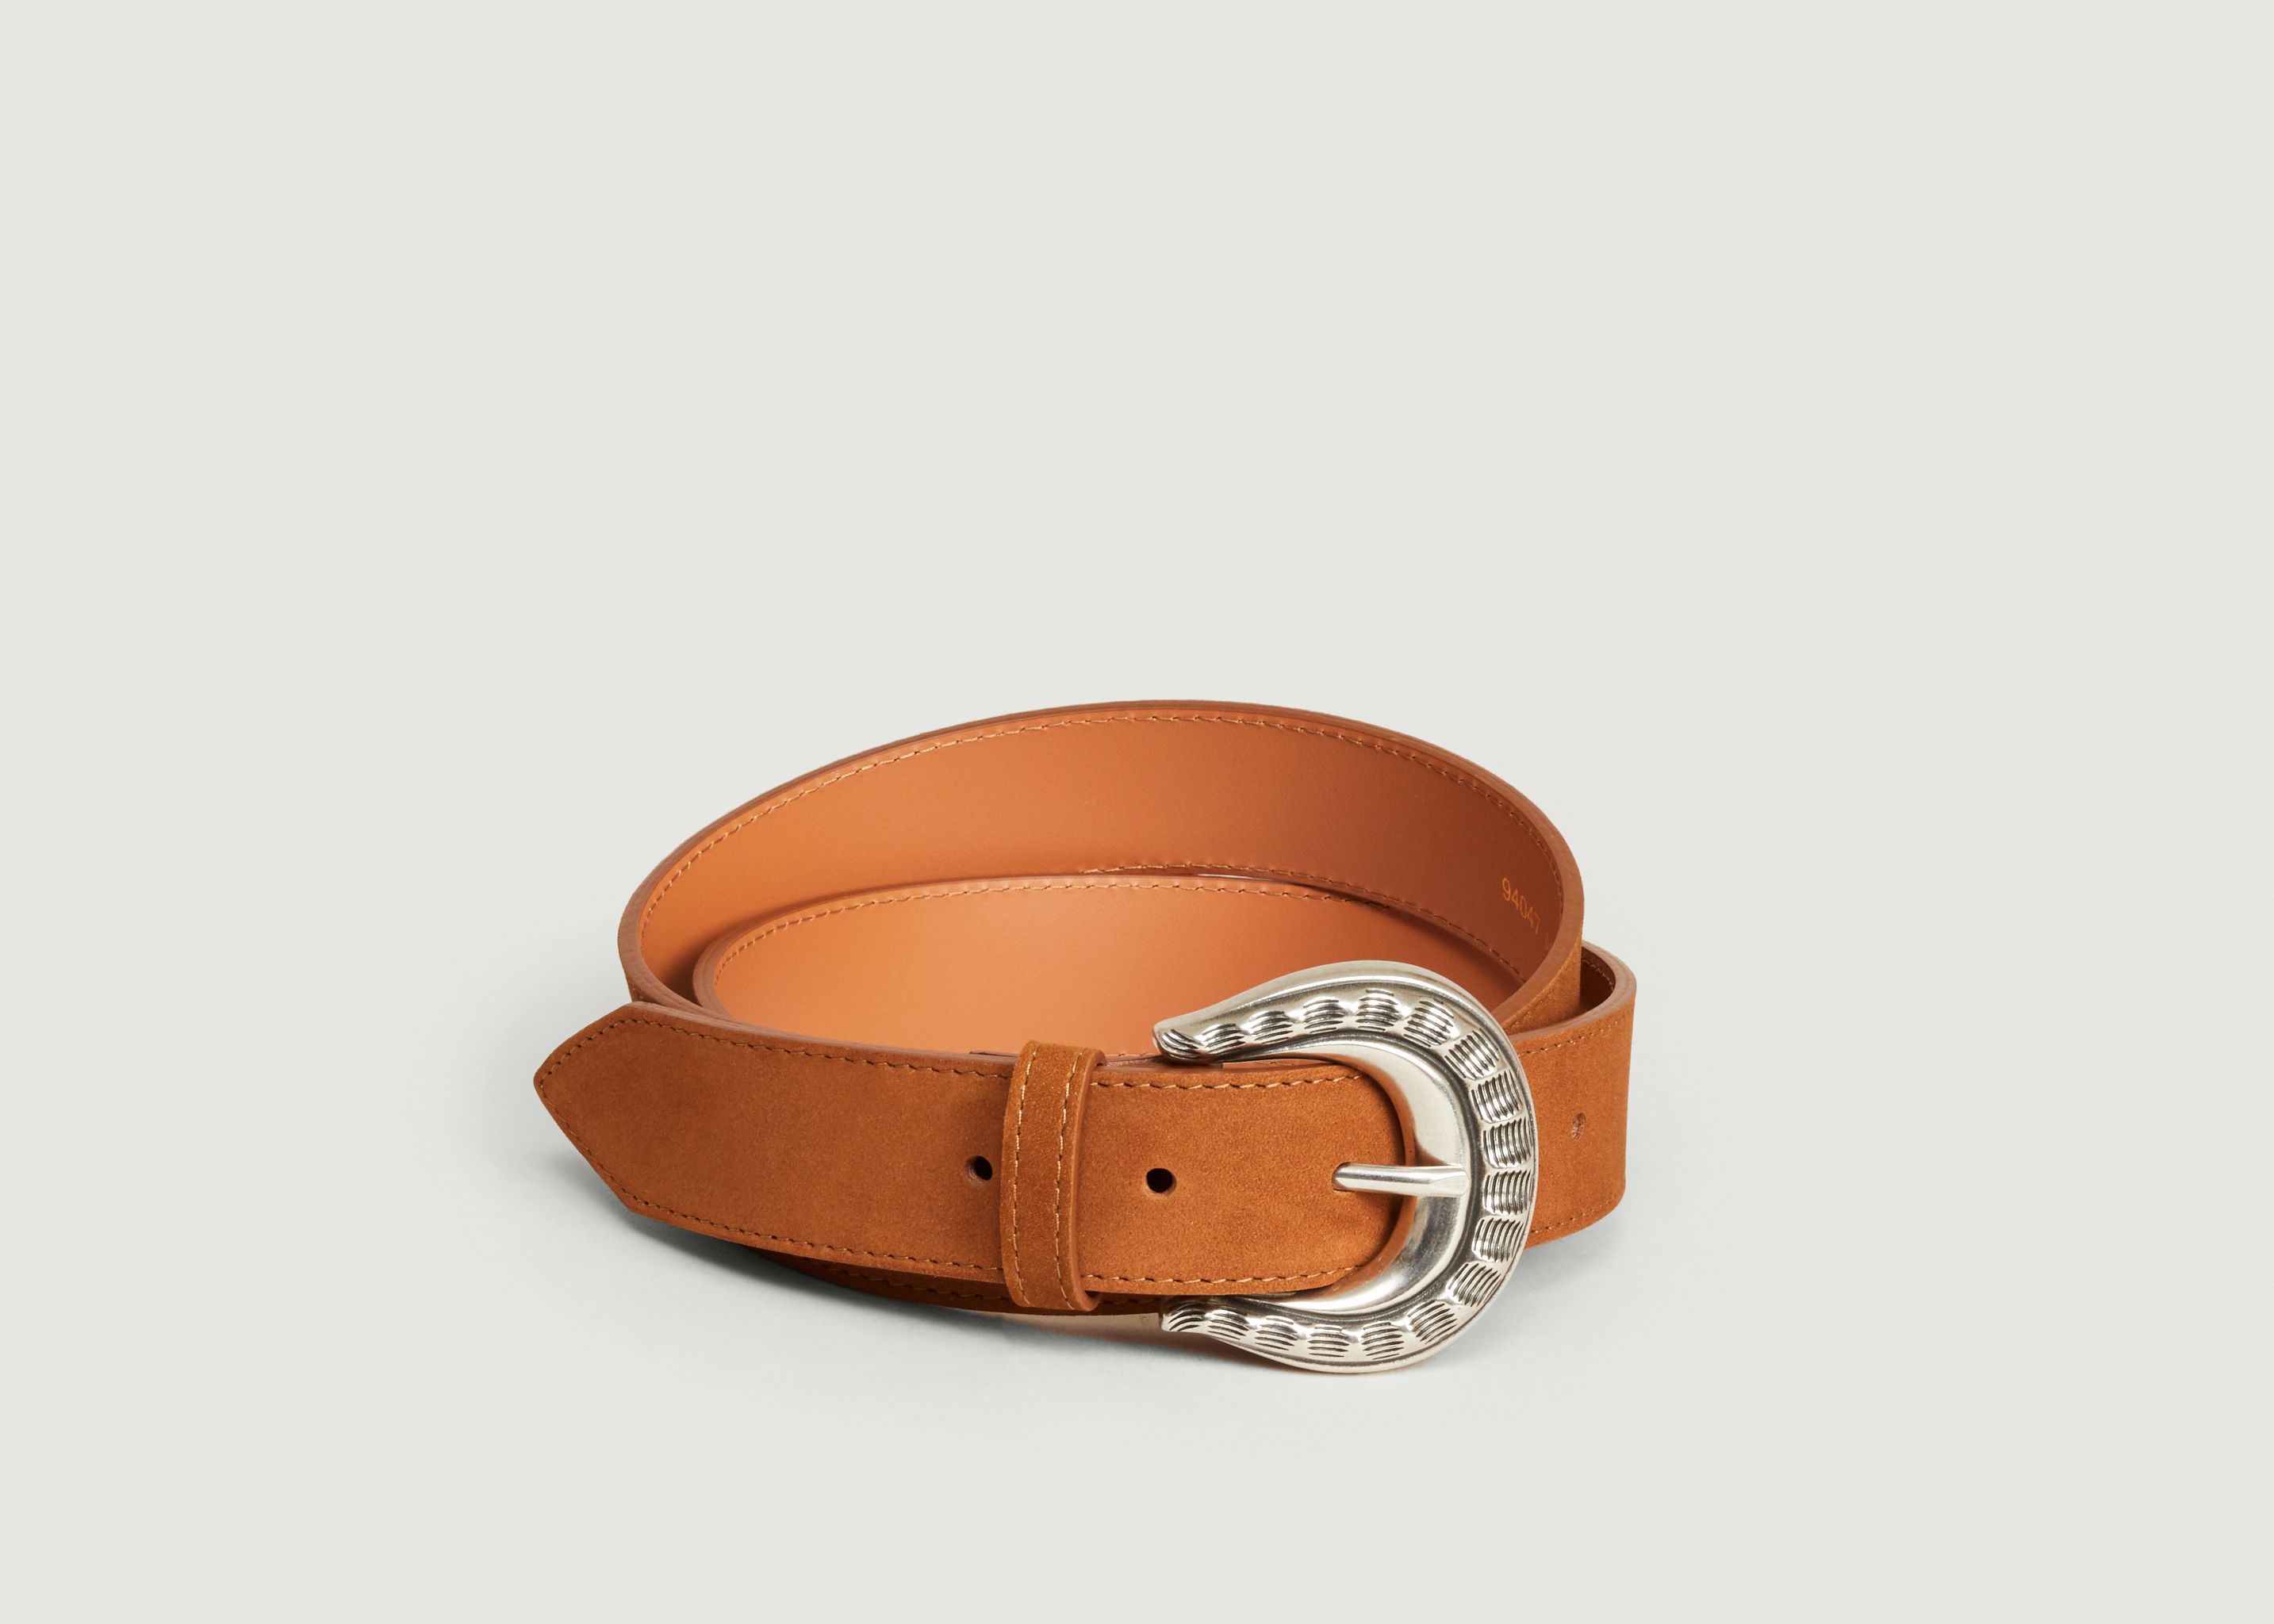 Suede leather belt with hammered buckle - Maison Boinet